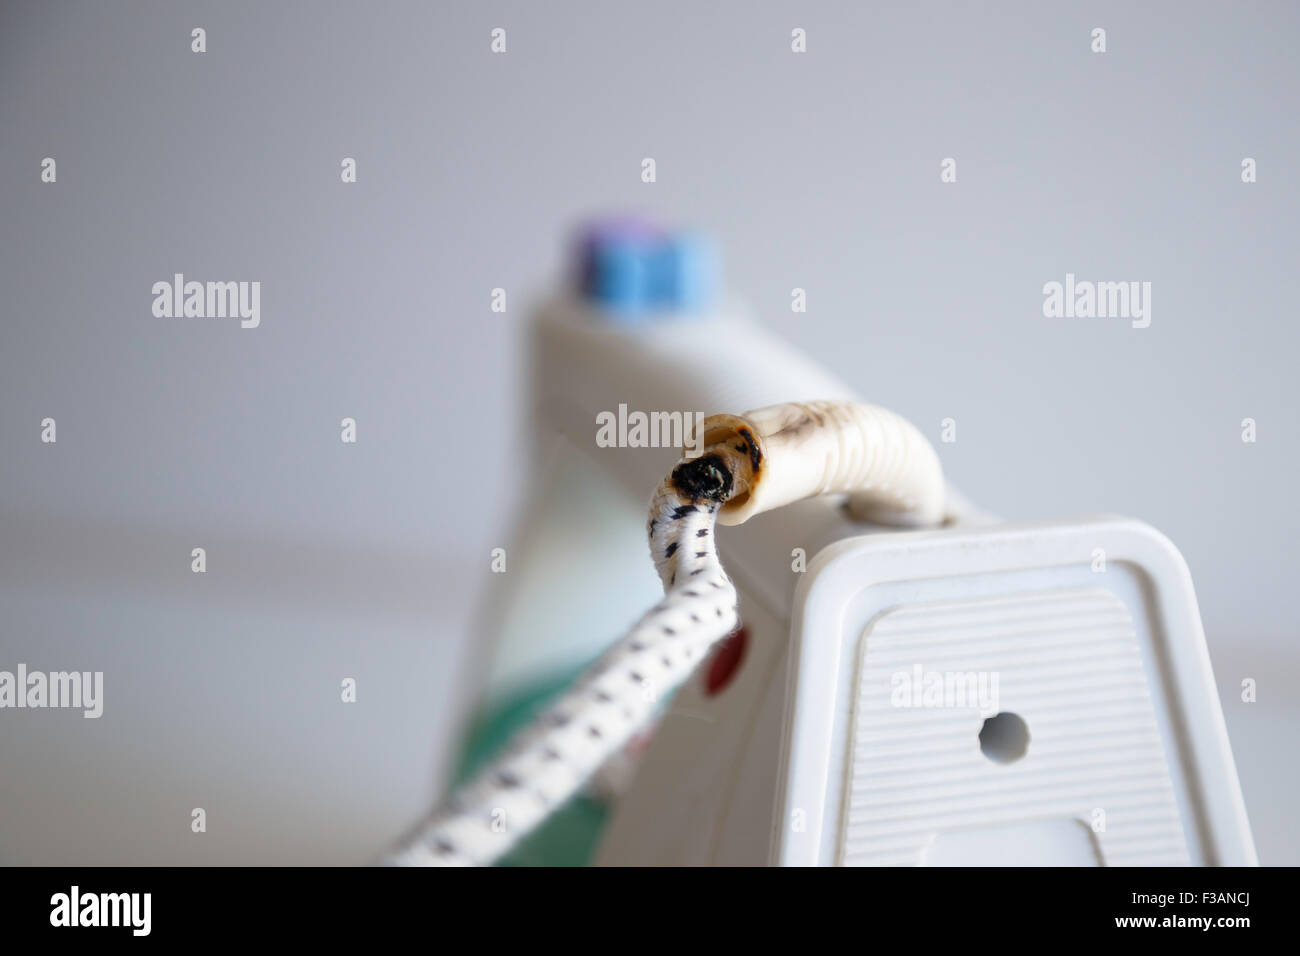 Damage on a lead of an electric iron caused by a short circuit. Stock Photo